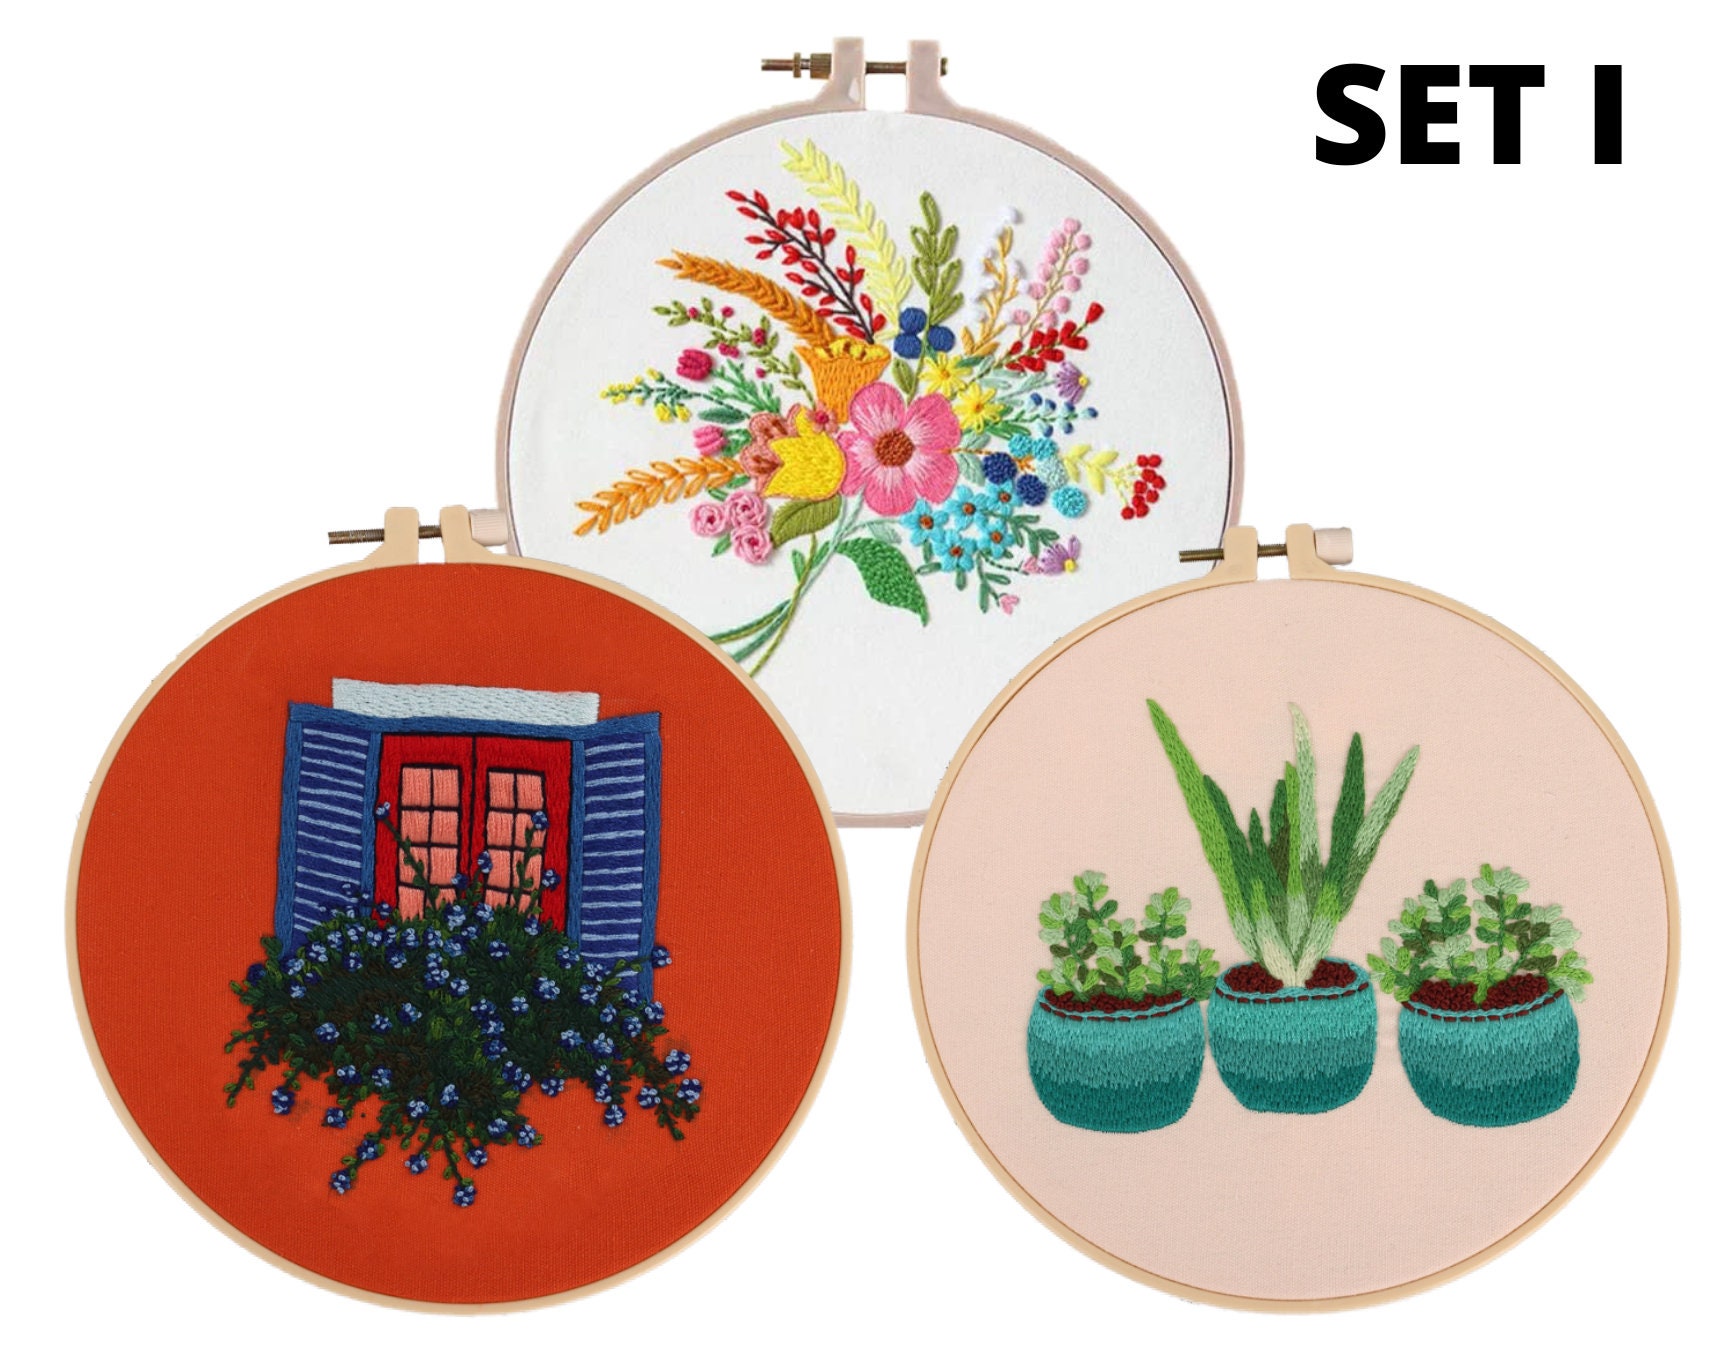 4 Pack Embroidery Starter Kit With Patterns, Embroidery Hoop, Floss and  Instructions Cross Stitch Set Adult Craft Kit -  Denmark